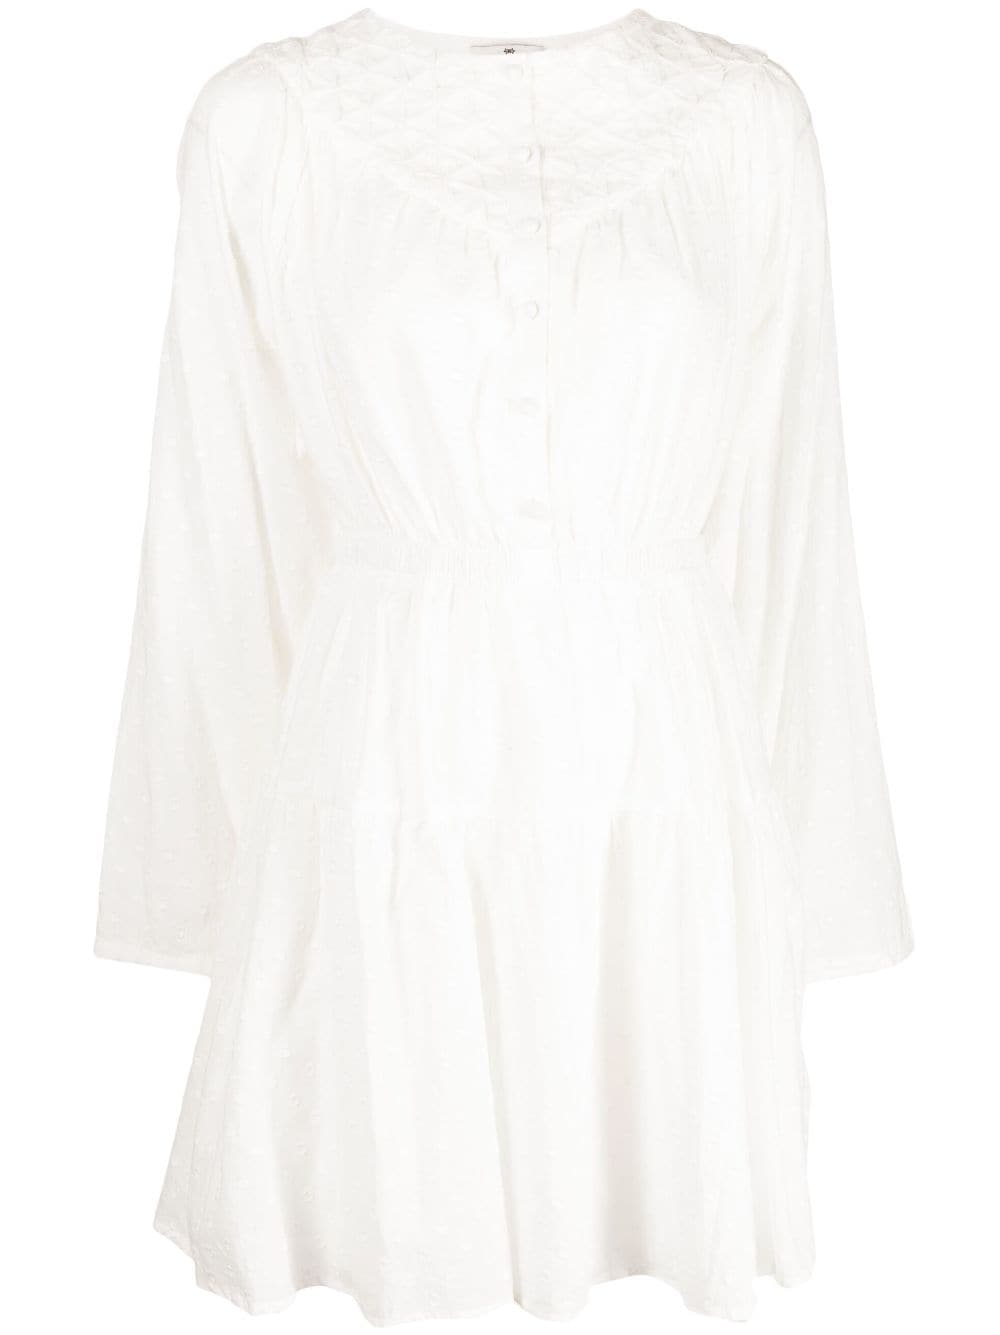 We Are Kindred Marybeth Honeycomb mini dress - White von We Are Kindred